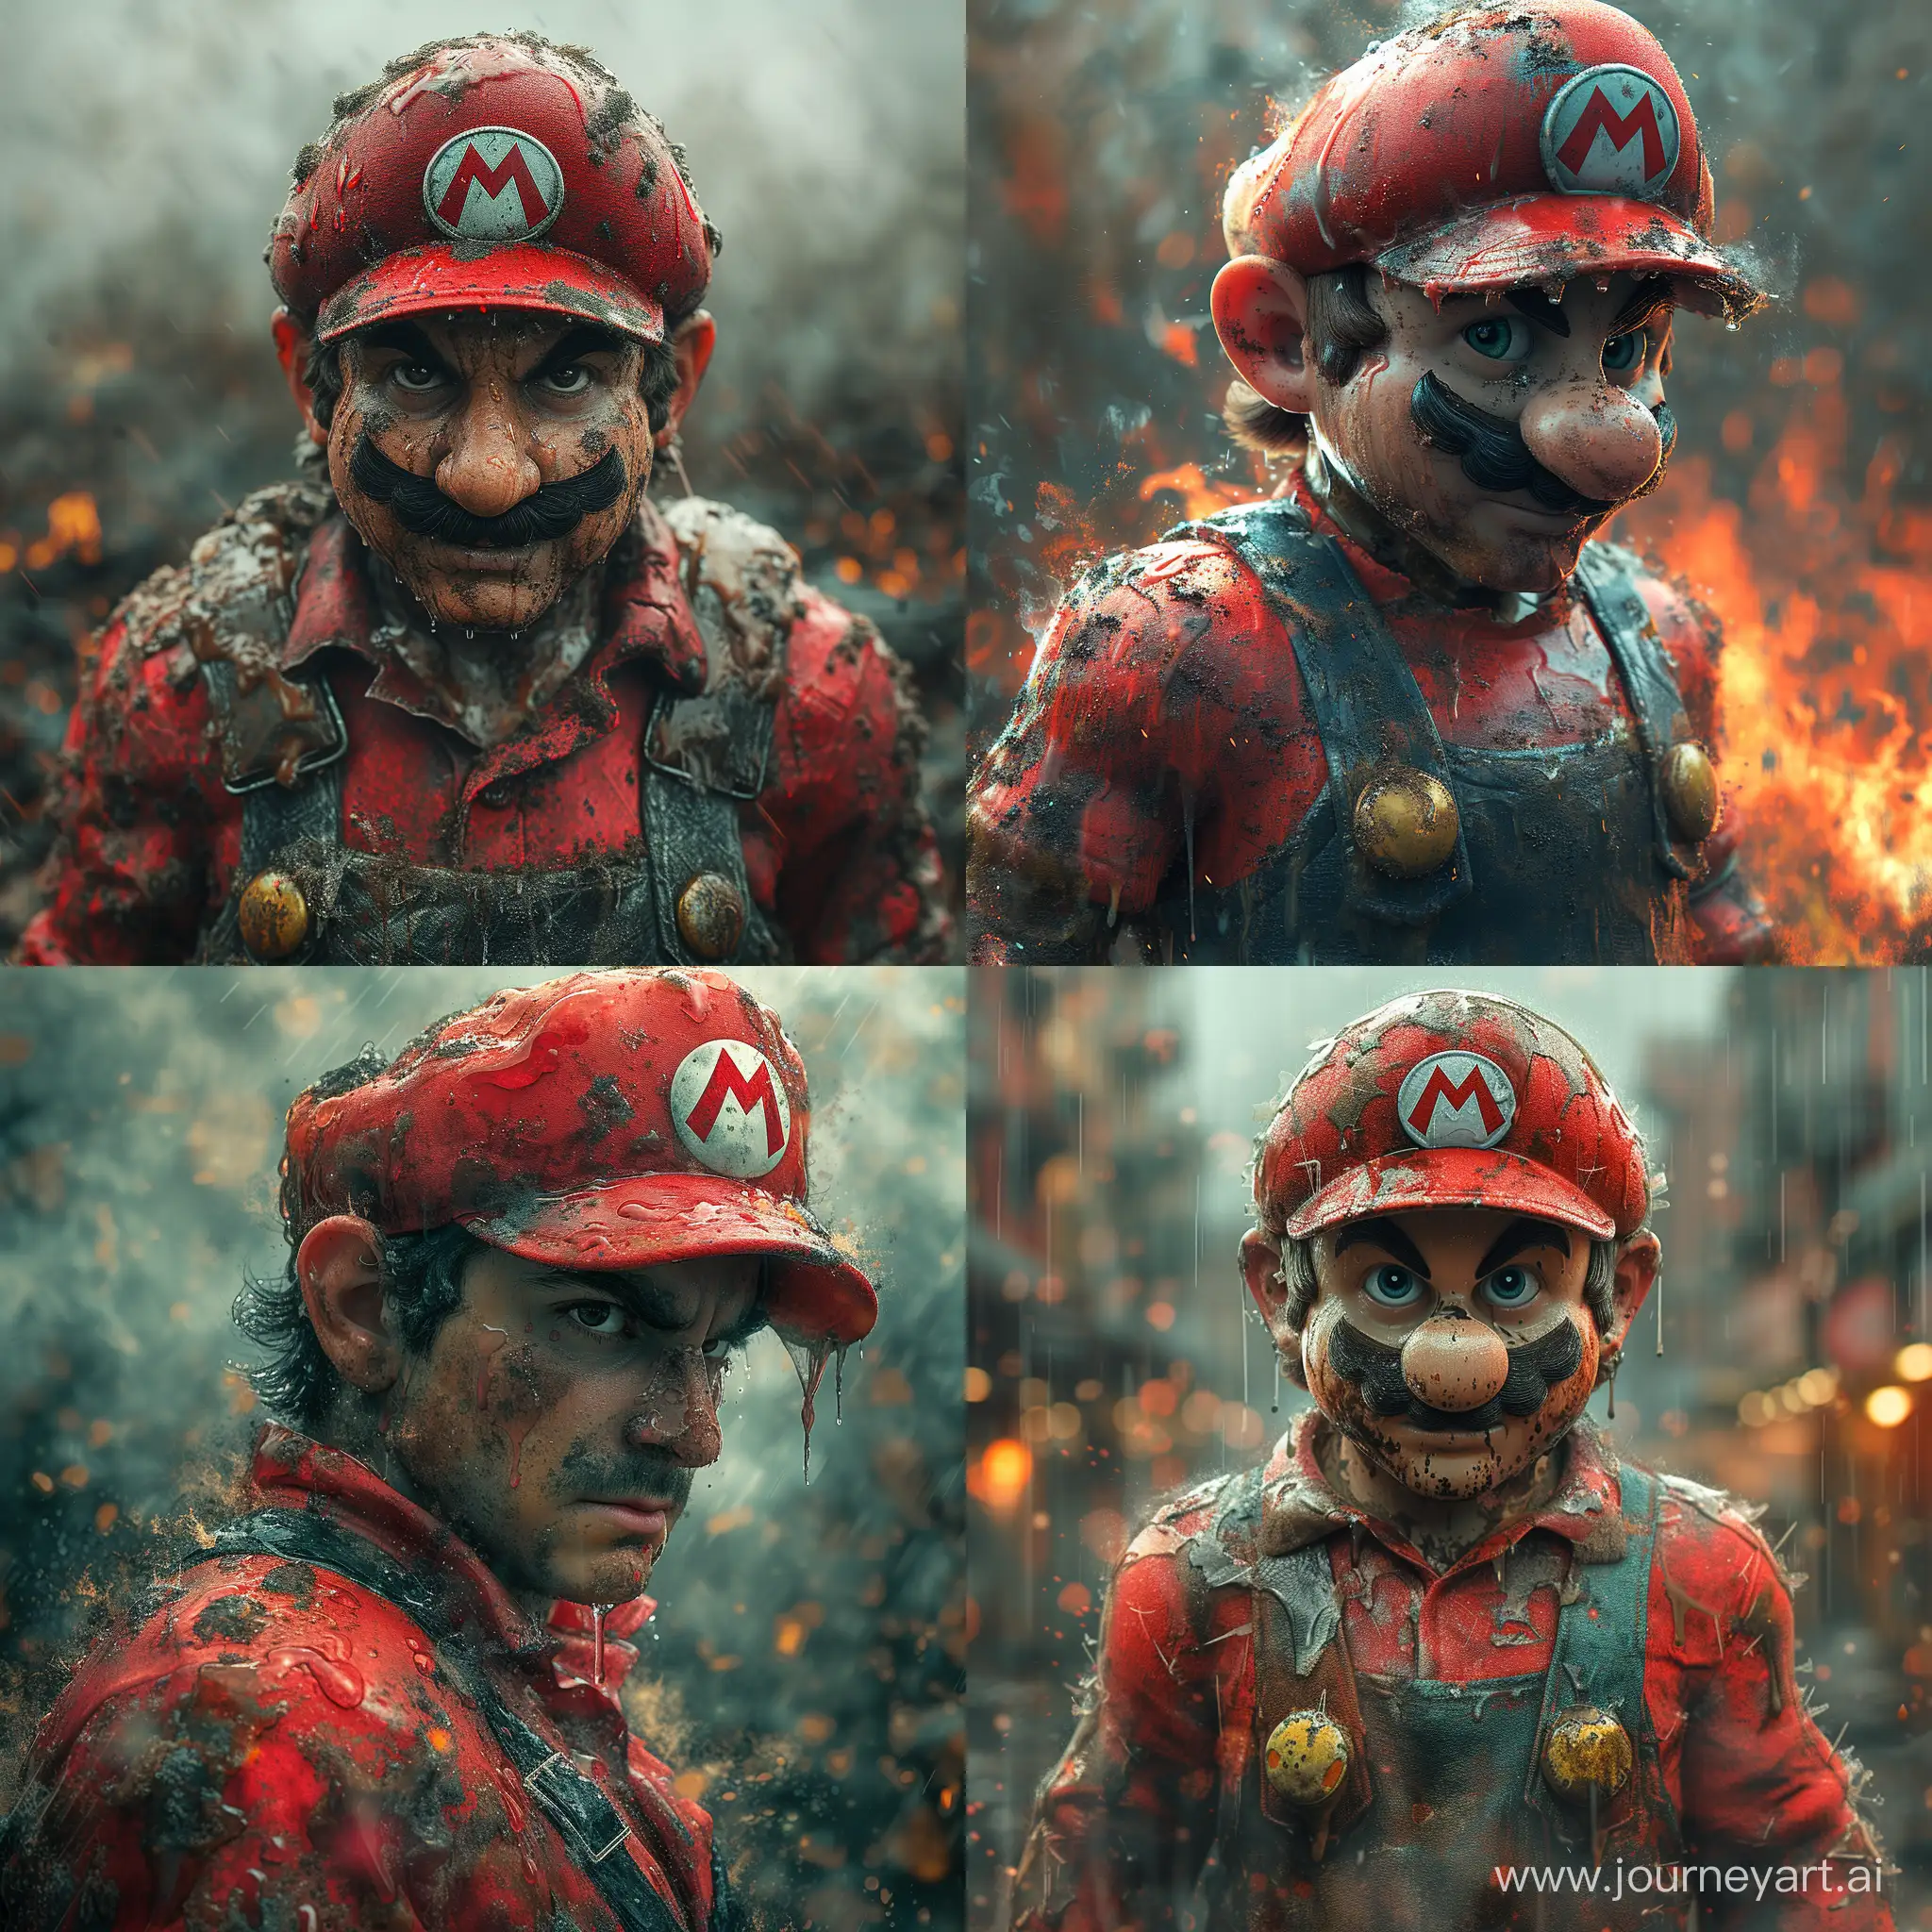 a creative, digitally-manipulated artwork of a character that seems inspired by the iconic video game will smith as character Mario from Nintendo's Mario series. However, unlike the traditional, whimsical portrayal of Mario, this depiction is more realistic and gritty  --stylize 750 --v 6